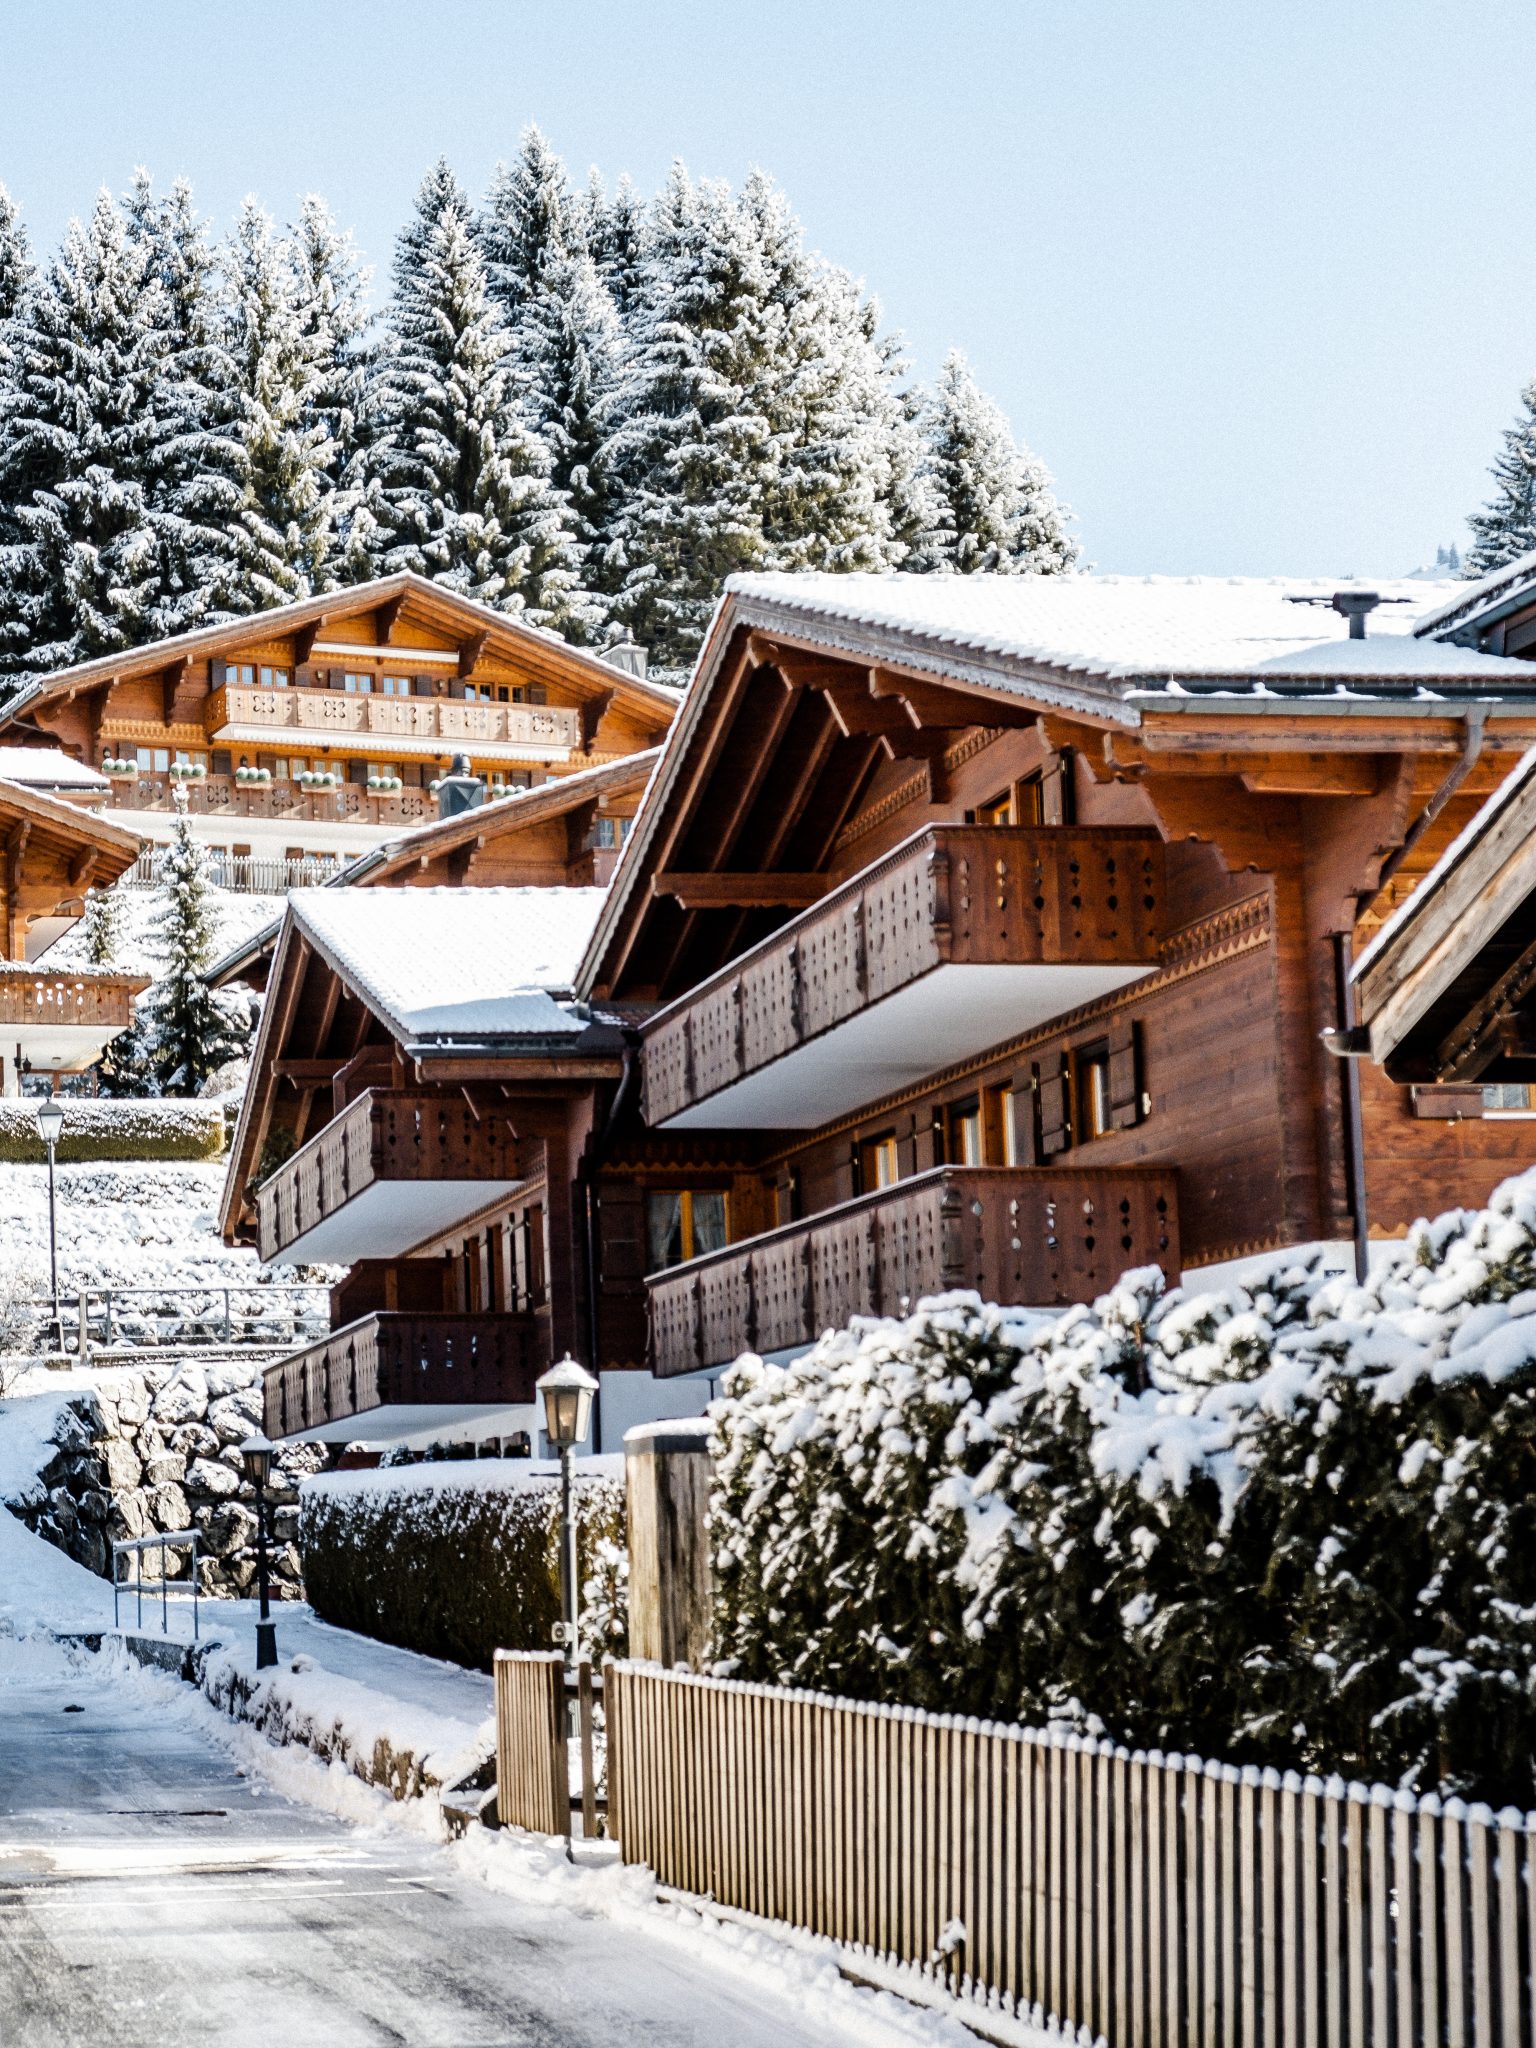 How FUN is this Louis Vuitton store in beautiful Gstaad Switzerland???